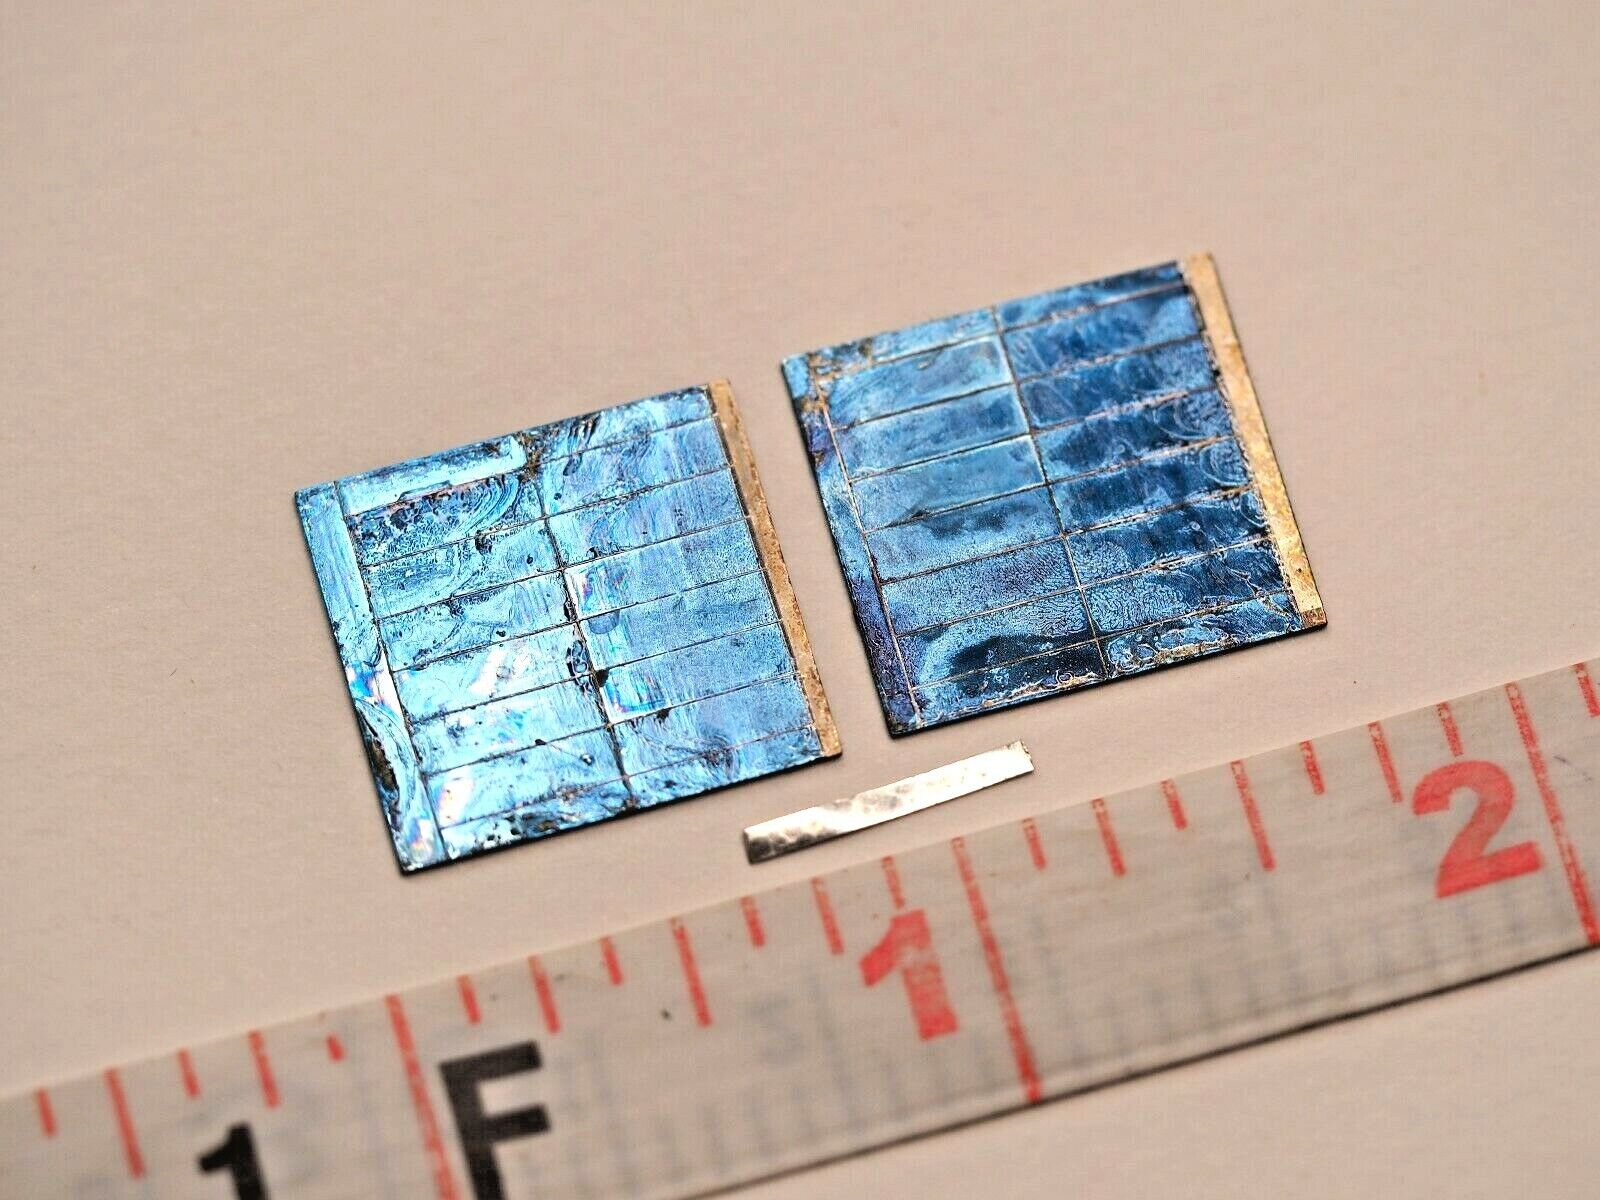 FromEU* Set of 2 solar cell from Space USSR military satellite \